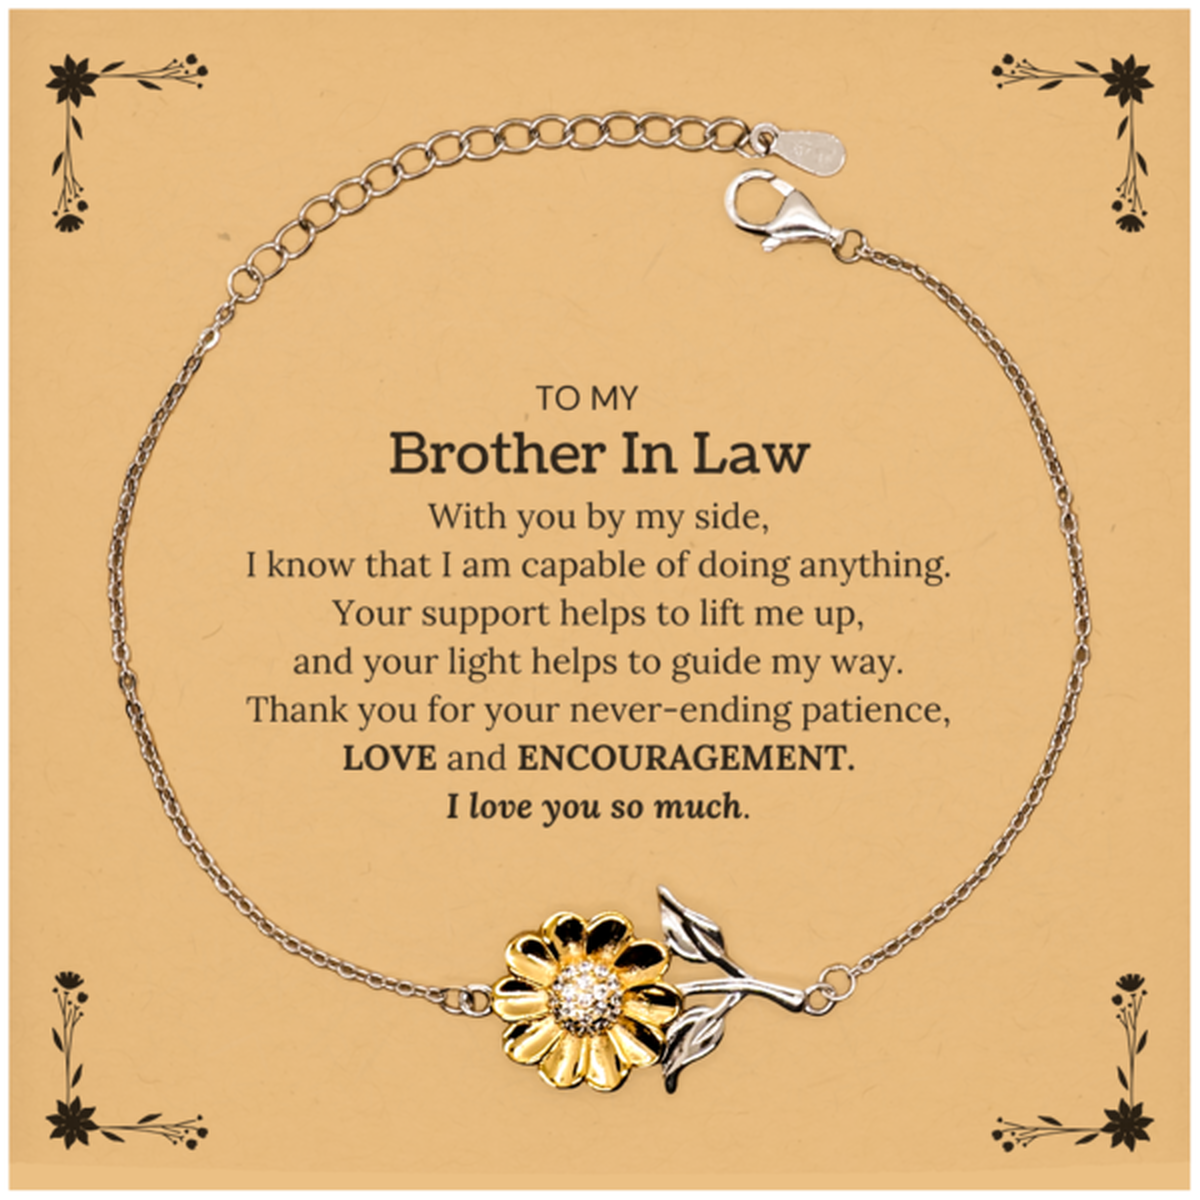 Appreciation Brother In Law Sunflower Bracelet Gifts, To My Brother In Law Birthday Christmas Wedding Keepsake Gifts for Brother In Law With you by my side, I know that I am capable of doing anything. I love you so much